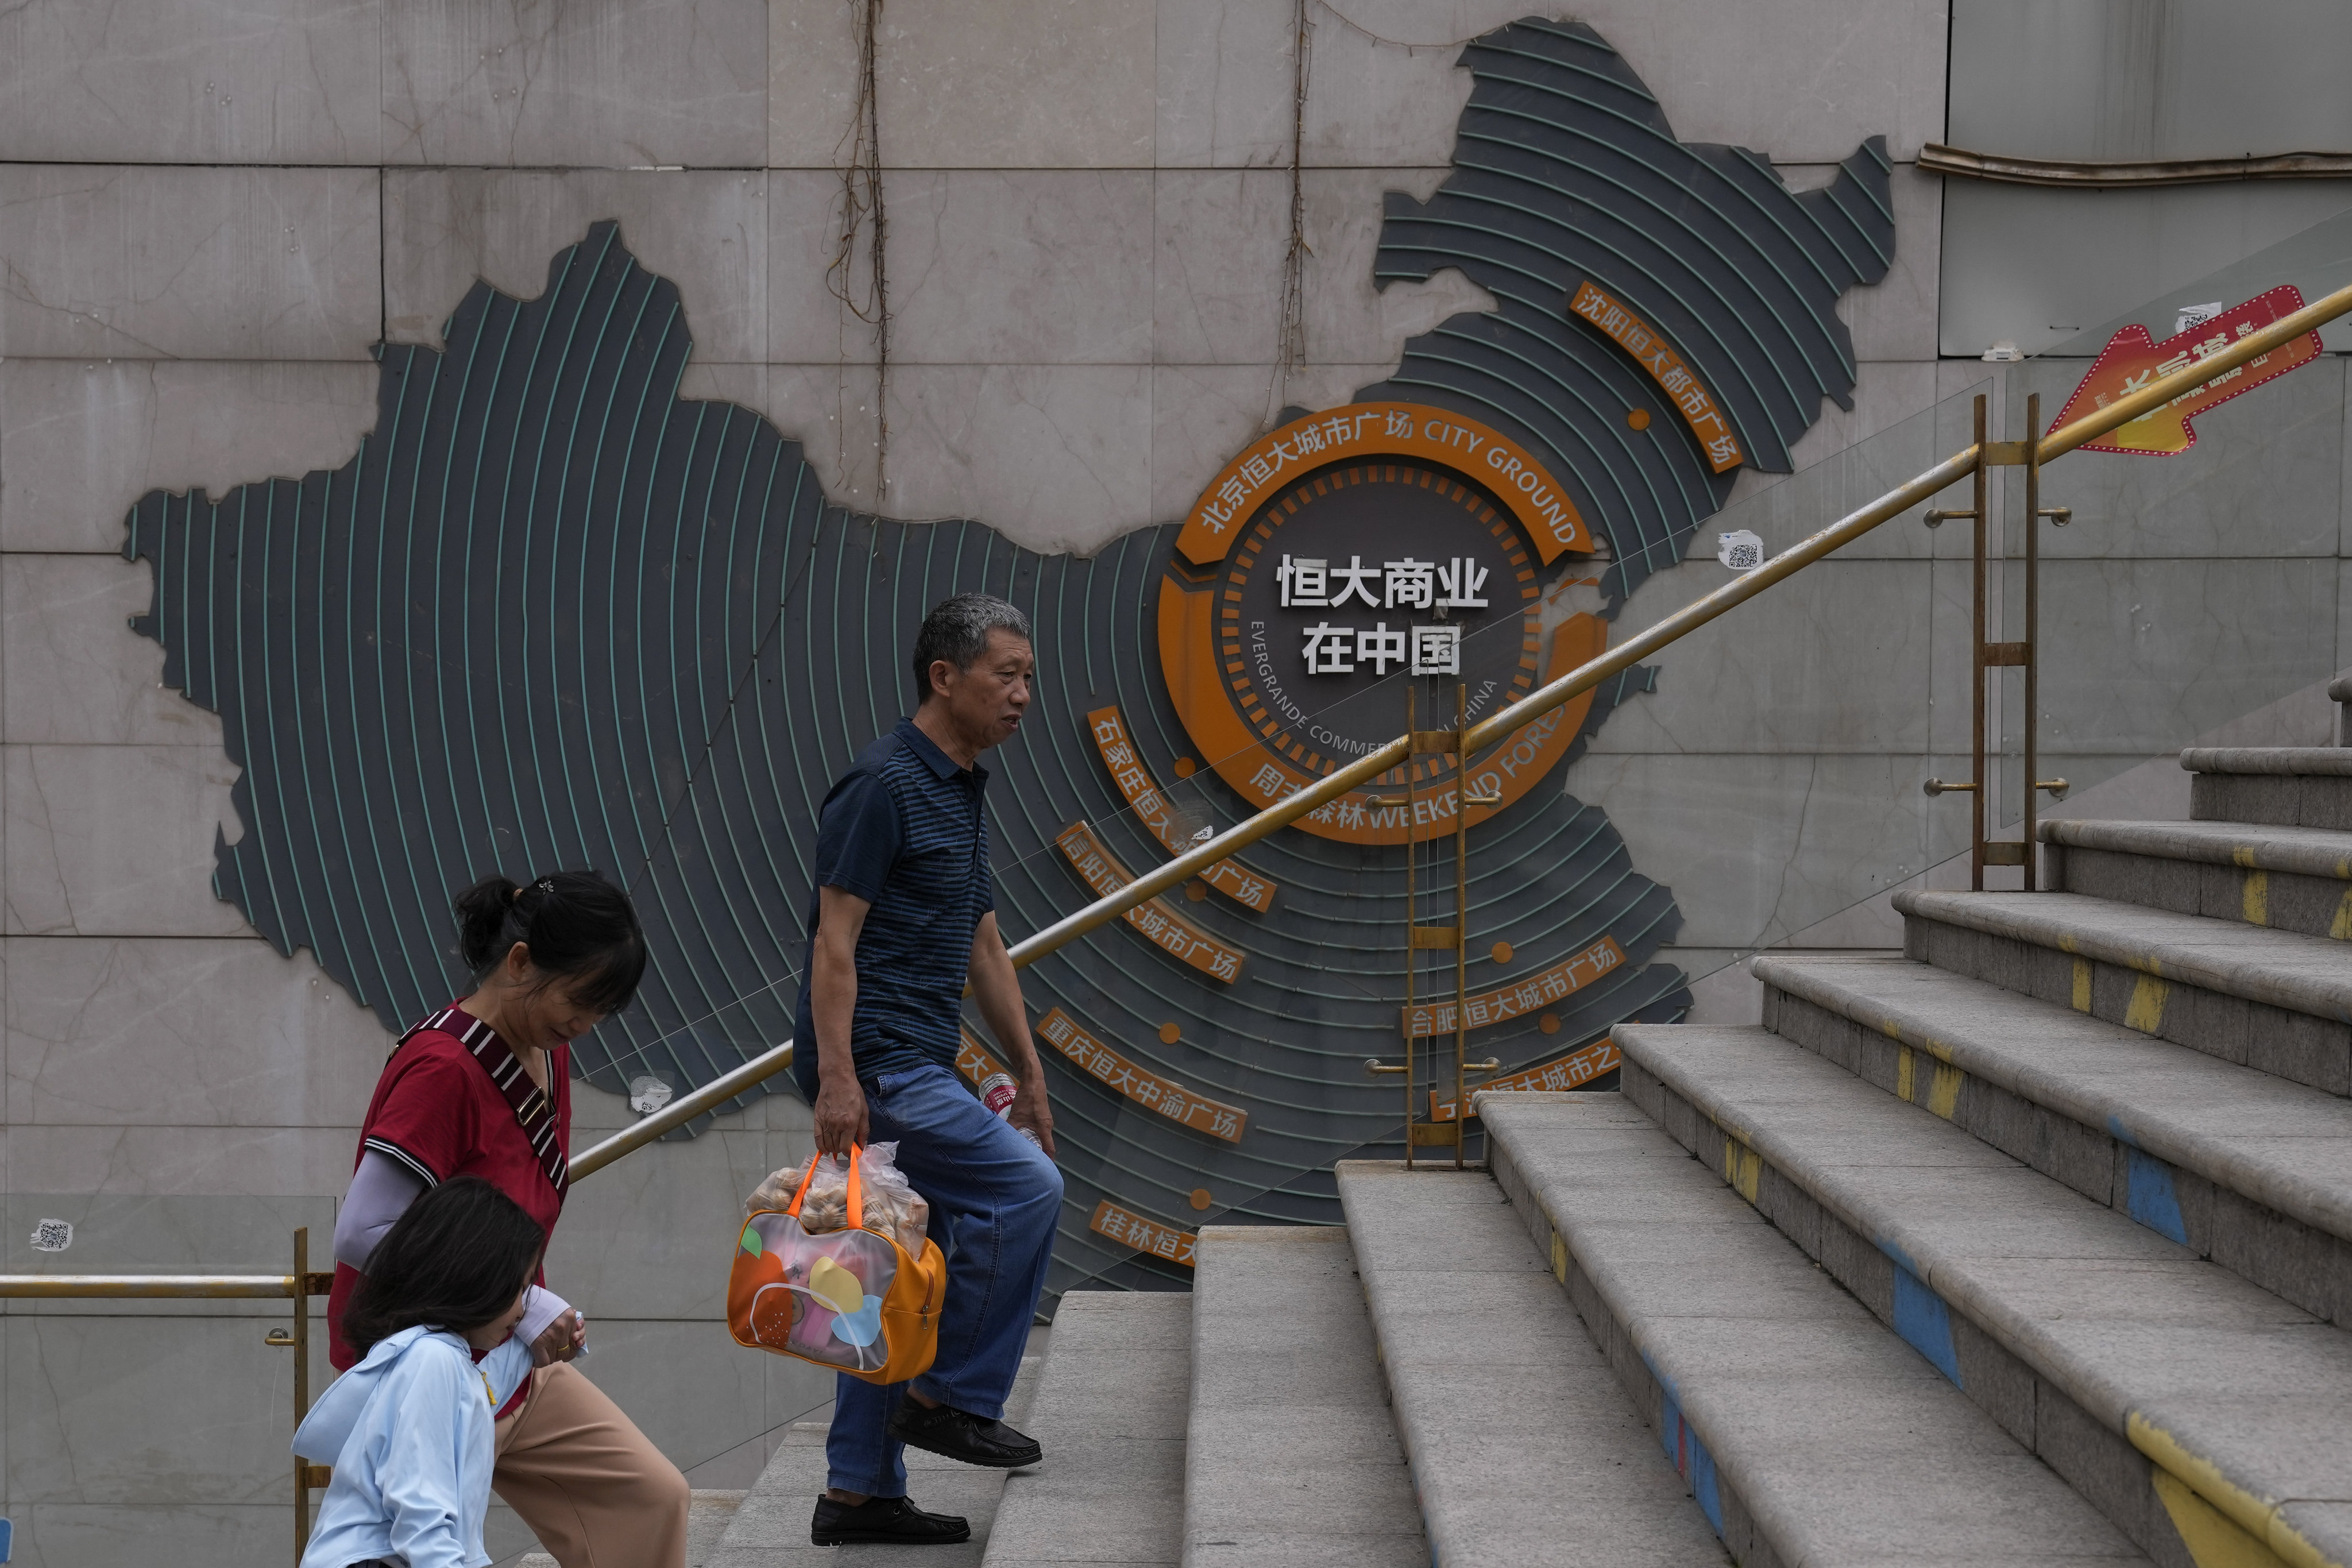 Residents walk past a map showing Evergrande development projects in China. Photo AP